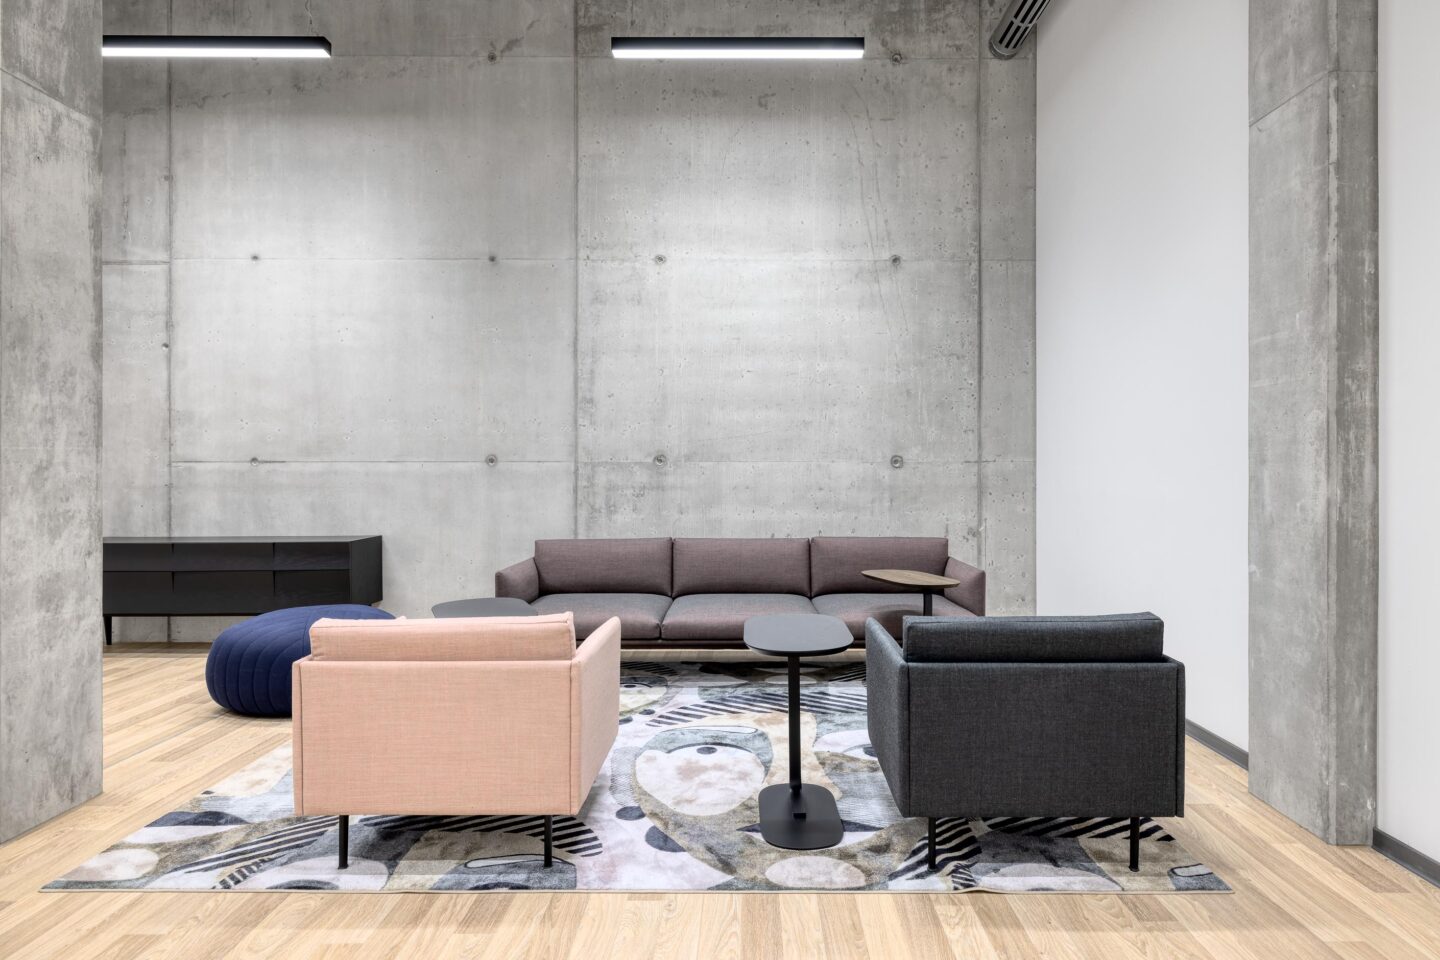 Muuto Couches and side tables │ Lounge │ feco offive furniture for CyberLab in Karlsruhe